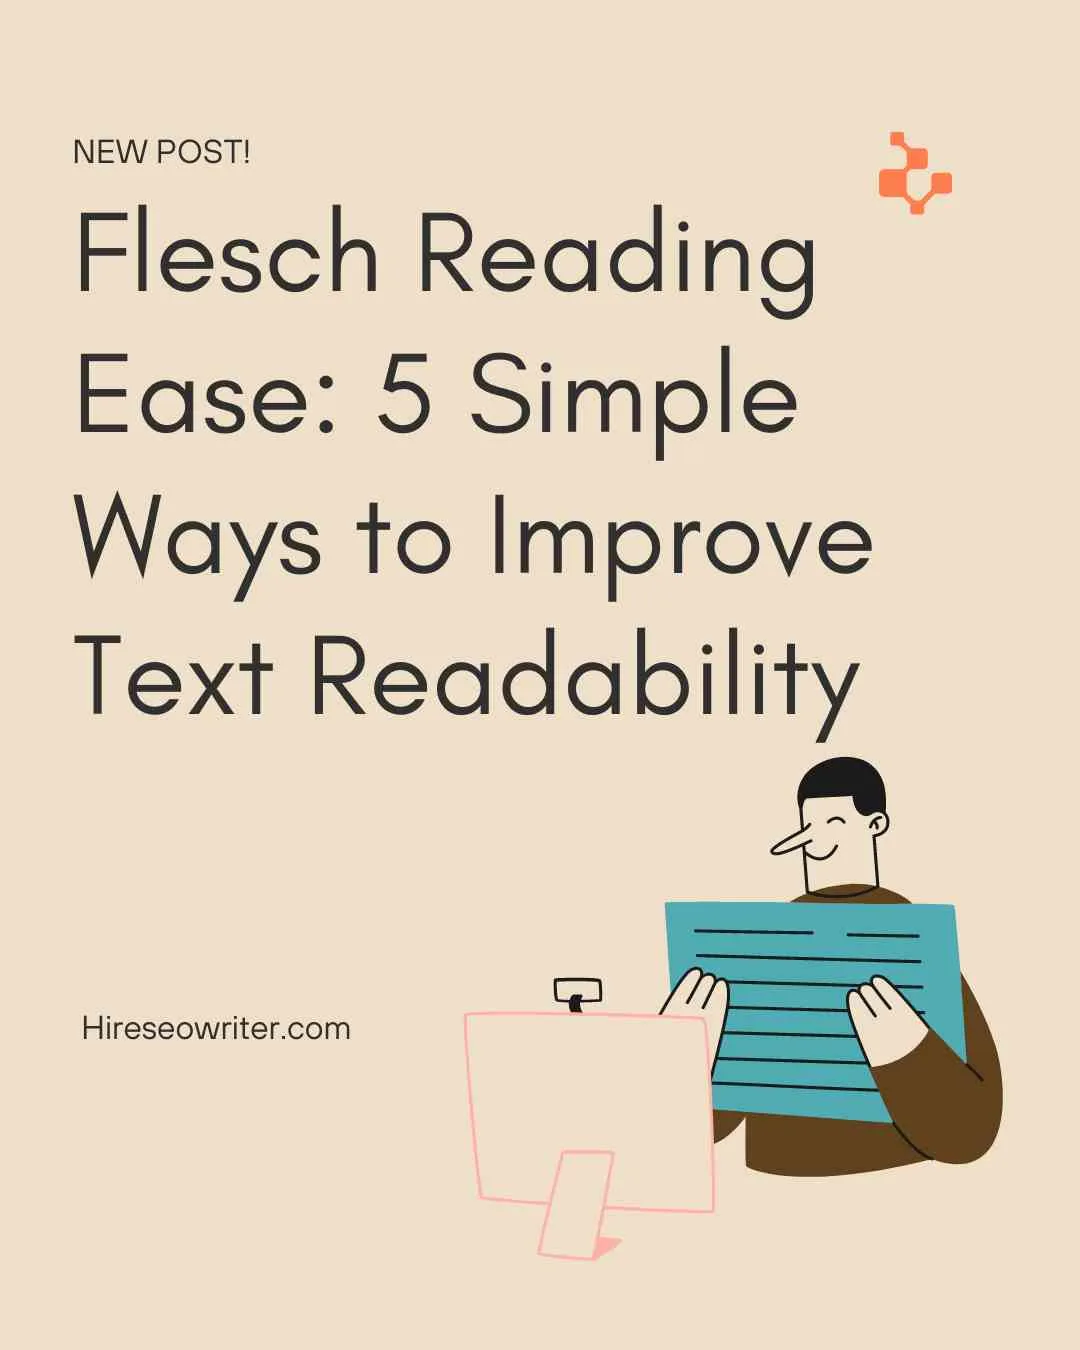 Flesch Reading Ease: 5 Simple Ways to Improve Text Readability